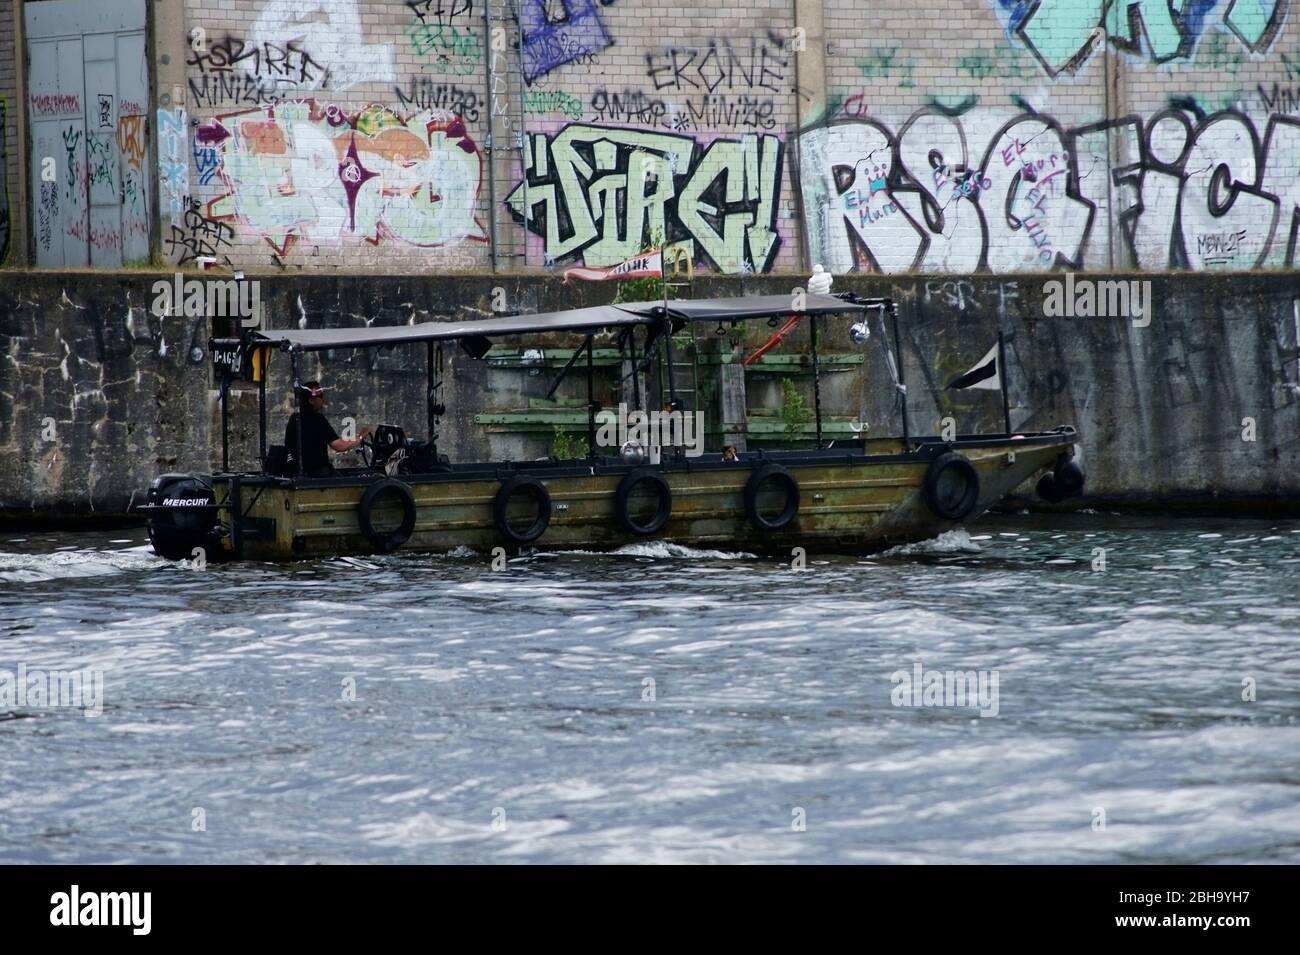 Berlin, Germany, a scrapped army patrol boat passes graffiti walls on the river Spree. Stock Photo